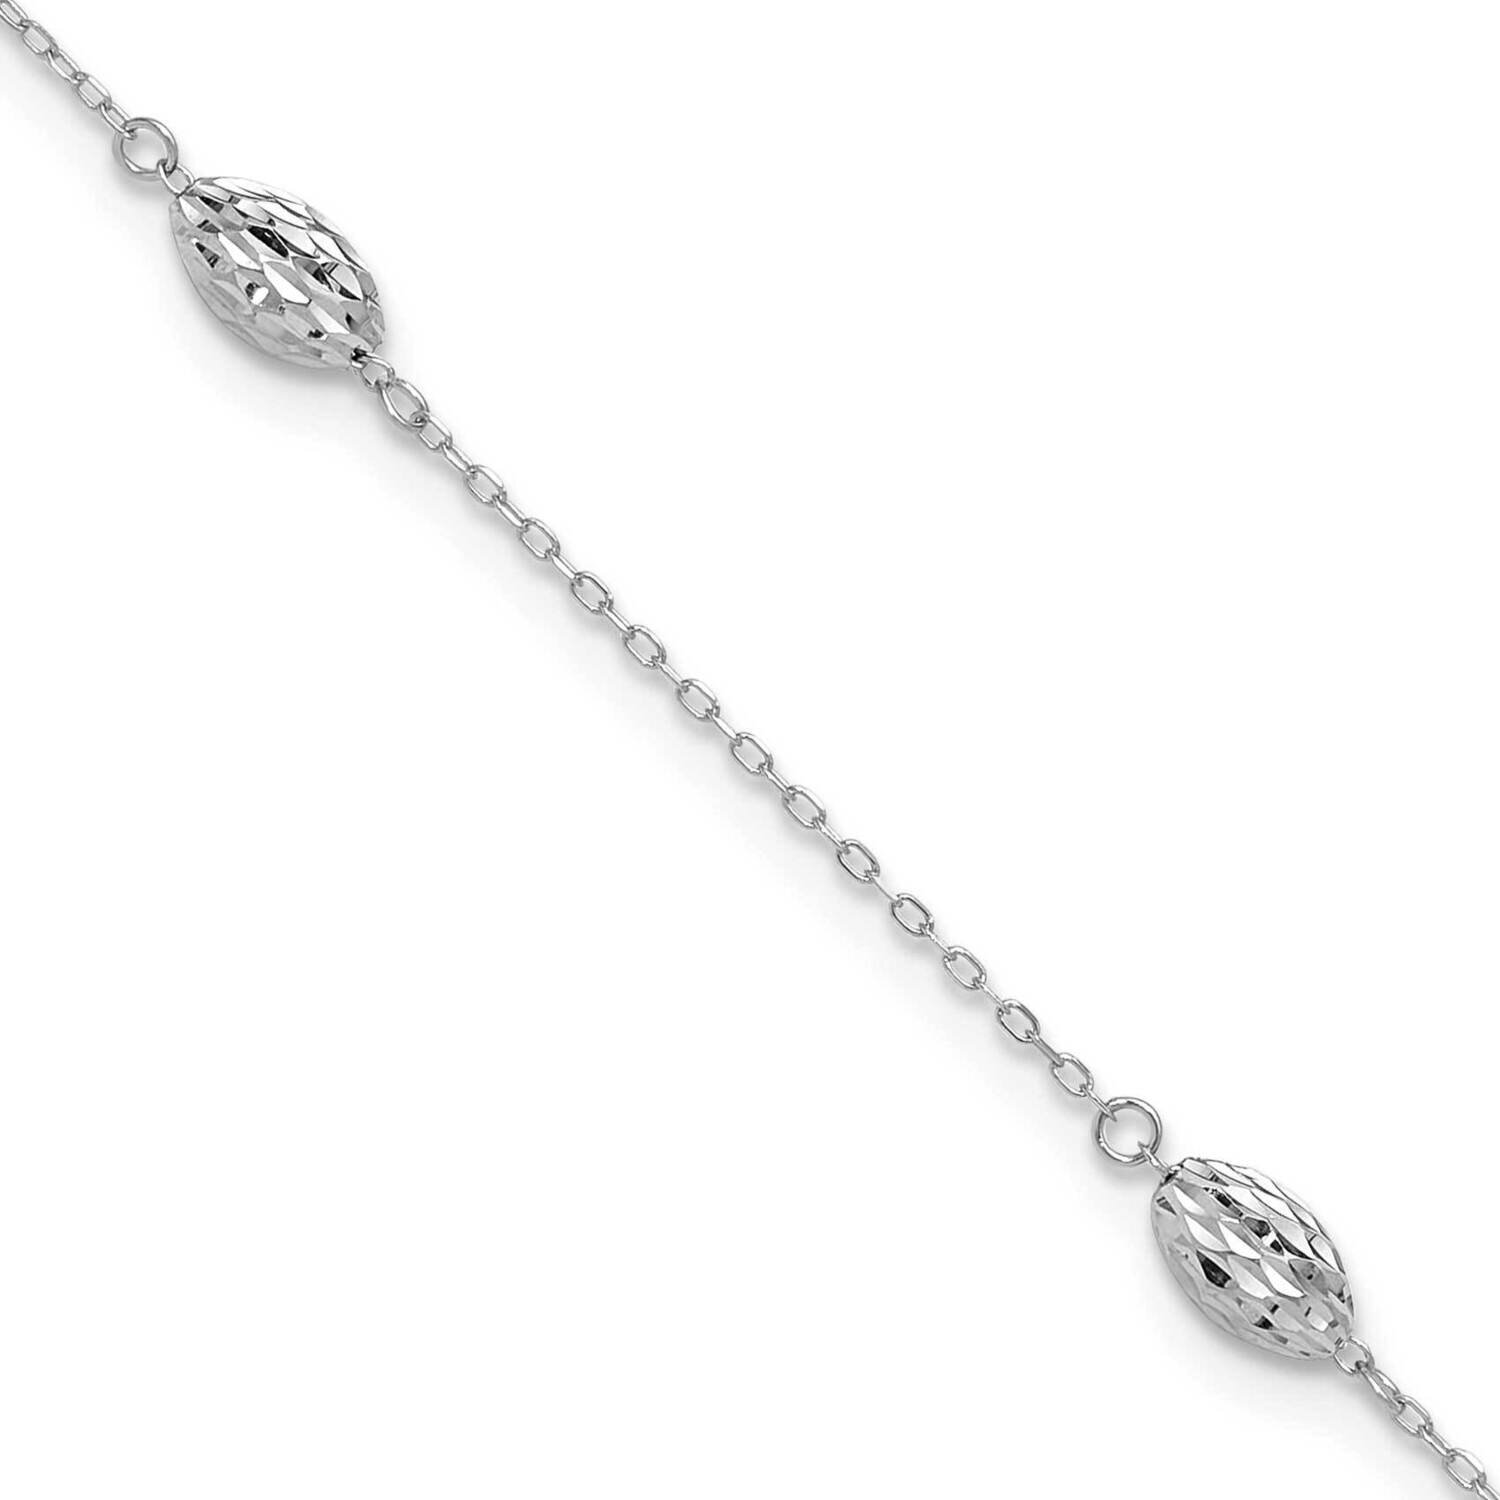 Puffed Rice Bead 10In Plus 1Inch Extension Anklet 14k White Gold ANK181-10